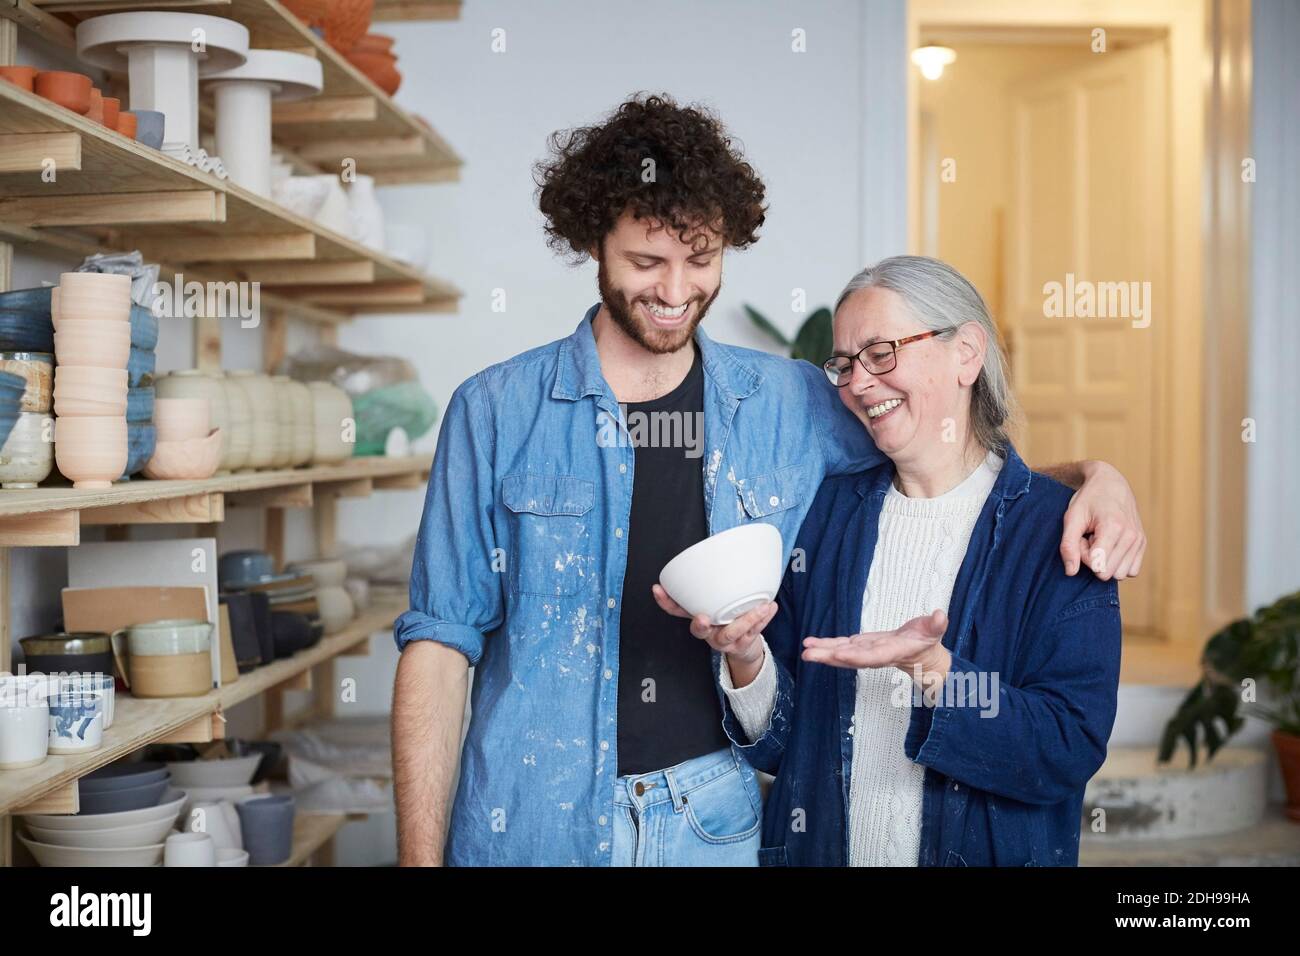 Smiling man and woman looking at bowl in pottery class Stock Photo